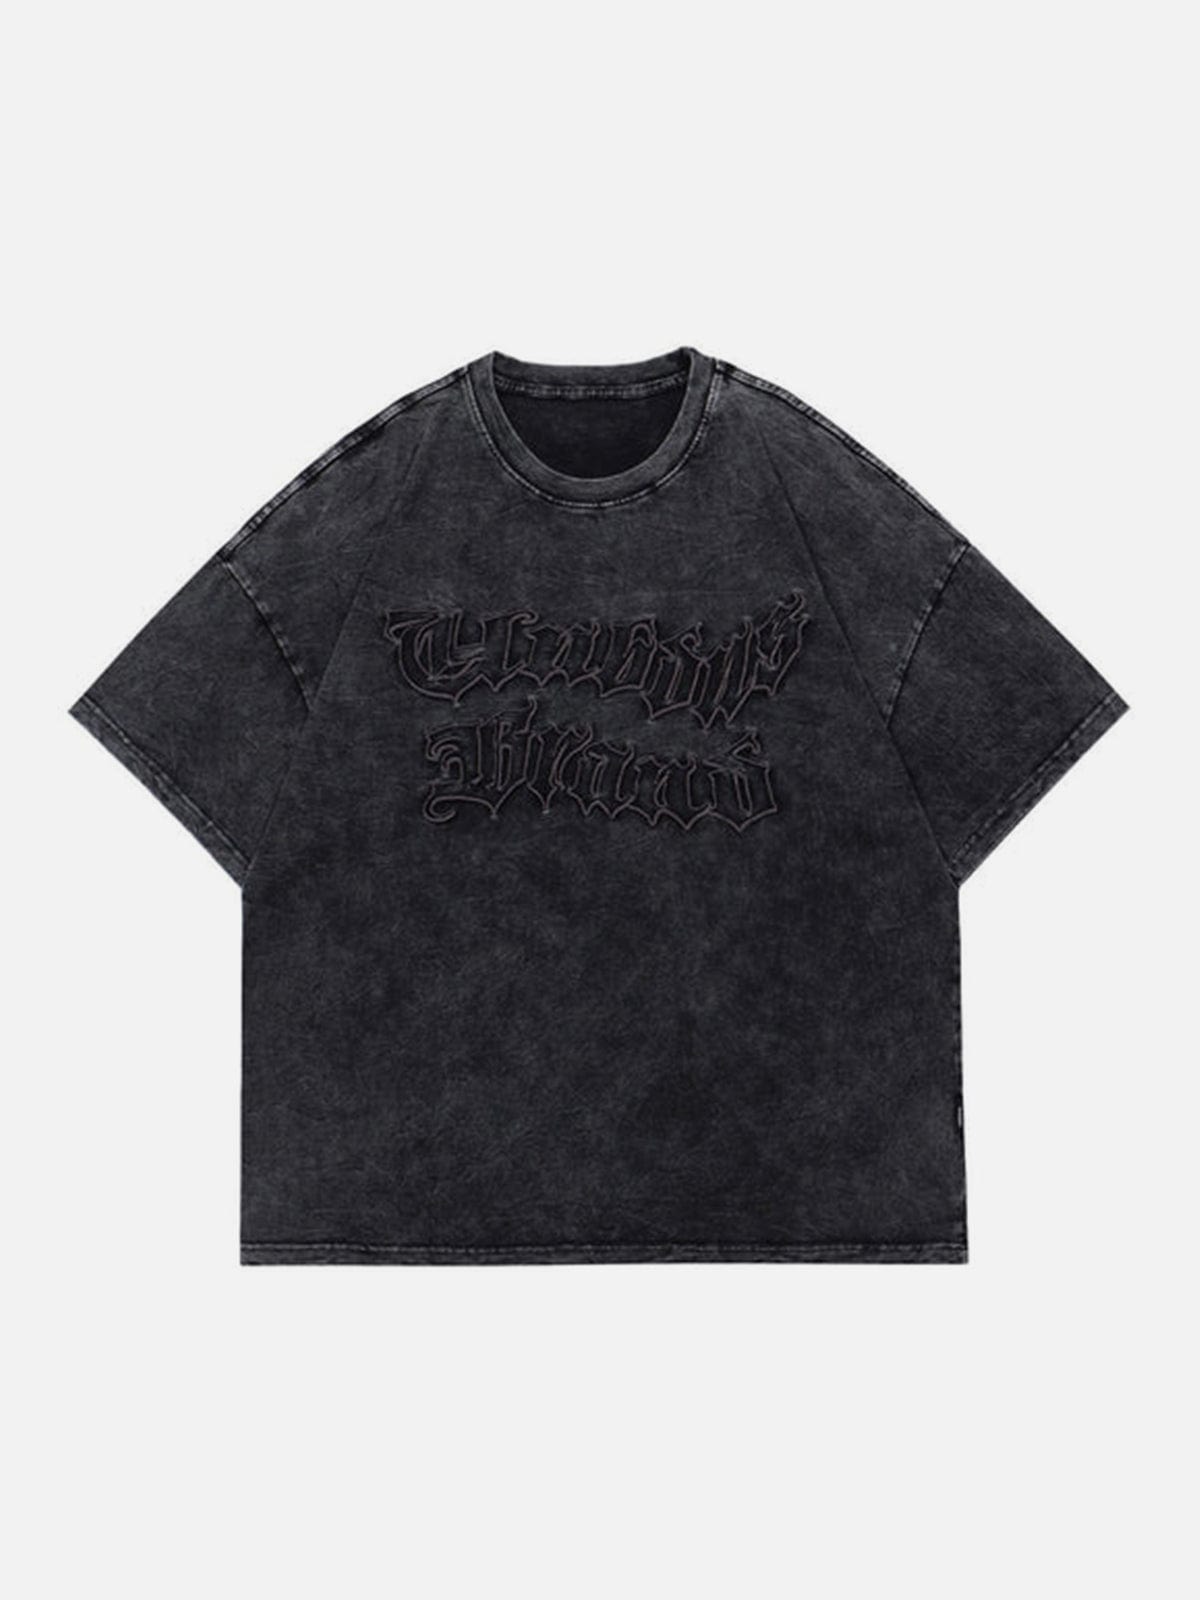 Irregular Embroidery Washed Graphic Tee Streetwear Brand Techwear Combat Tactical YUGEN THEORY